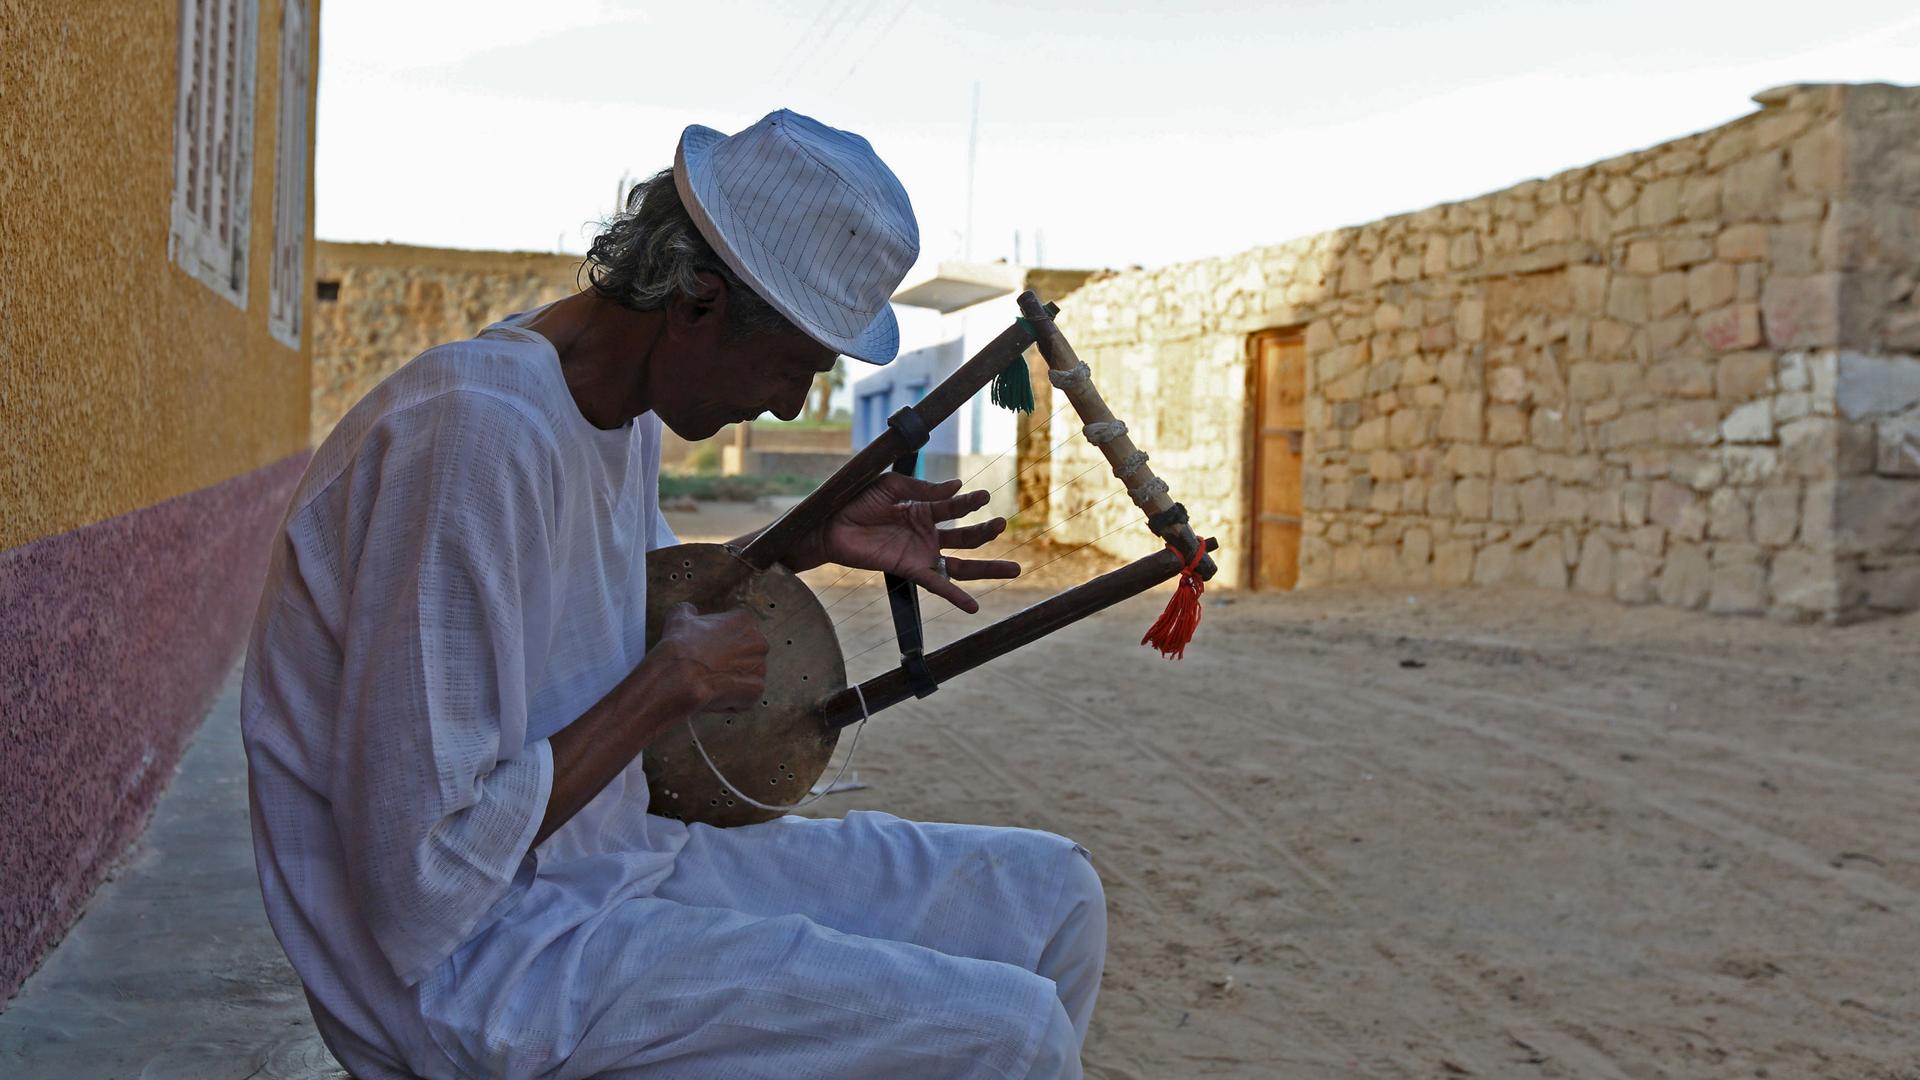 A man plays music on a traditional musical instrument in the Nubian village of Adindan